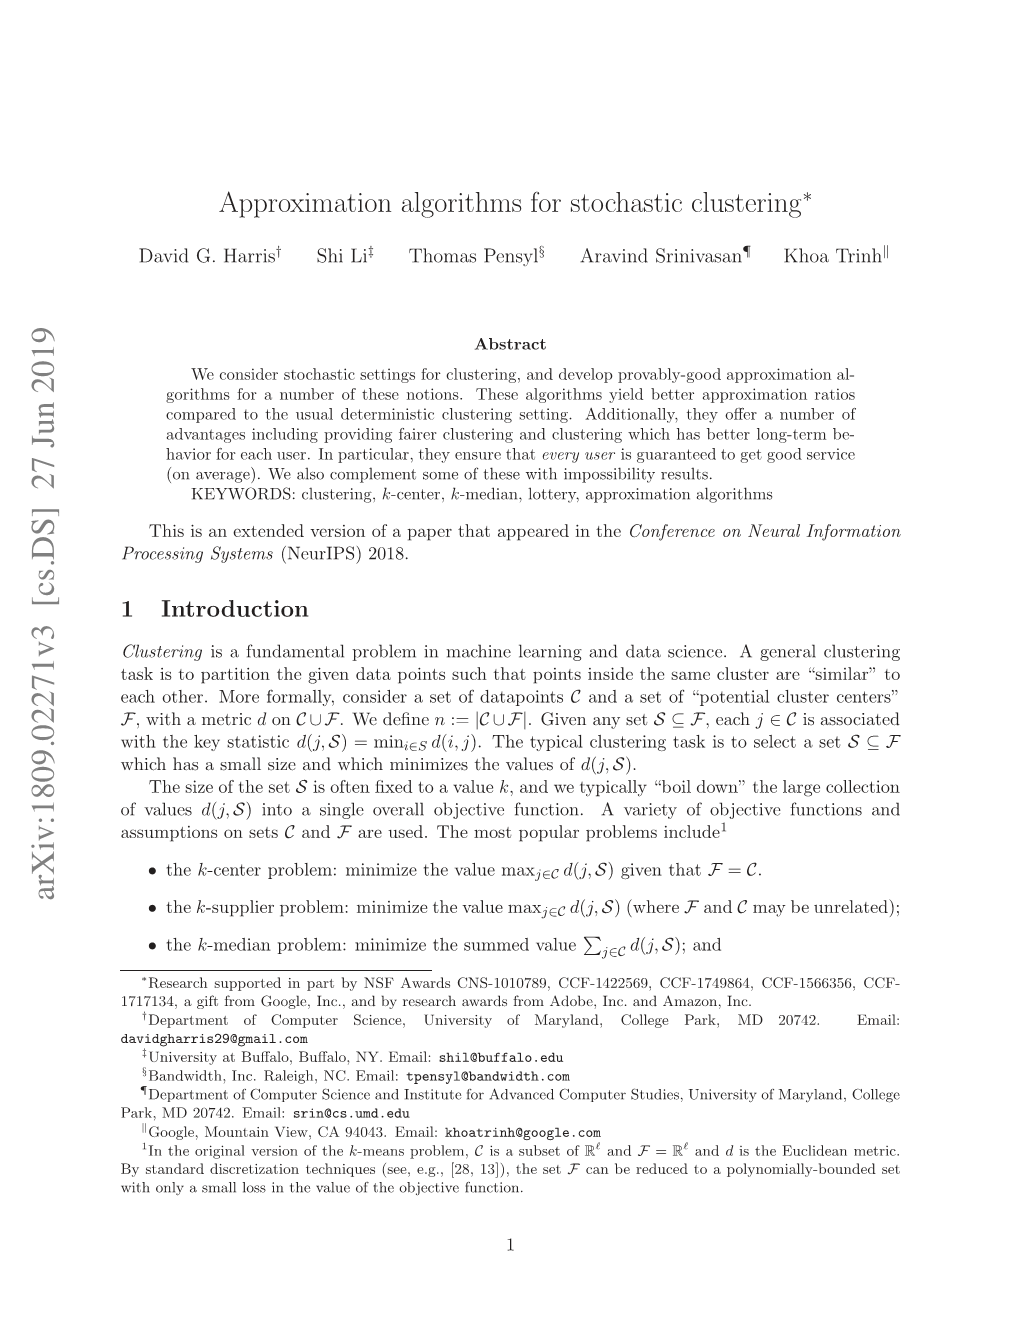 Approximation Algorithms for Stochastic Clustering